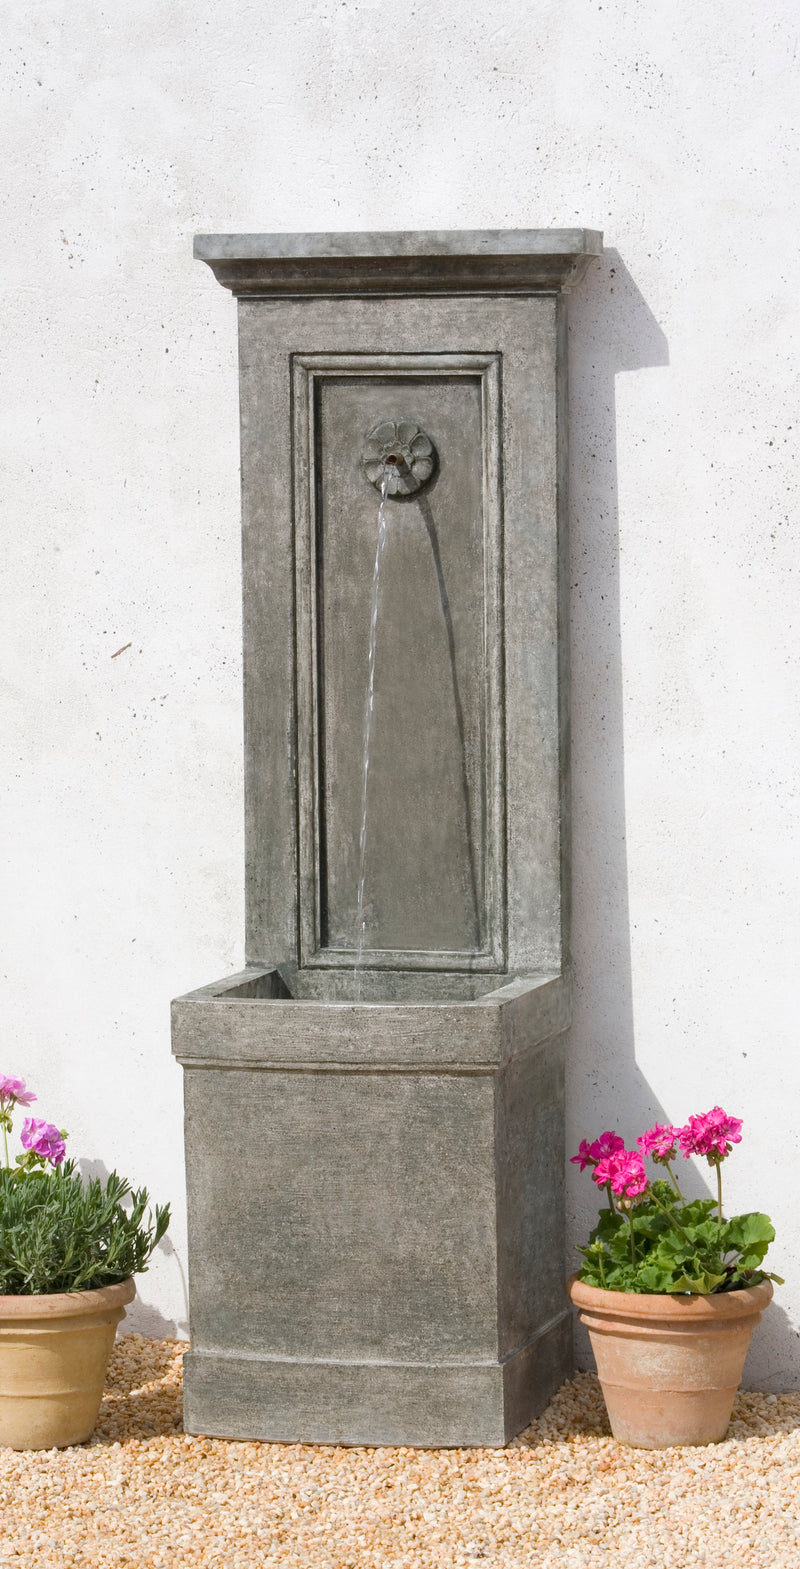 Tall, narrow, grey fountain placed against a white wall, flanked by planted terra cotta planters and pink flowers